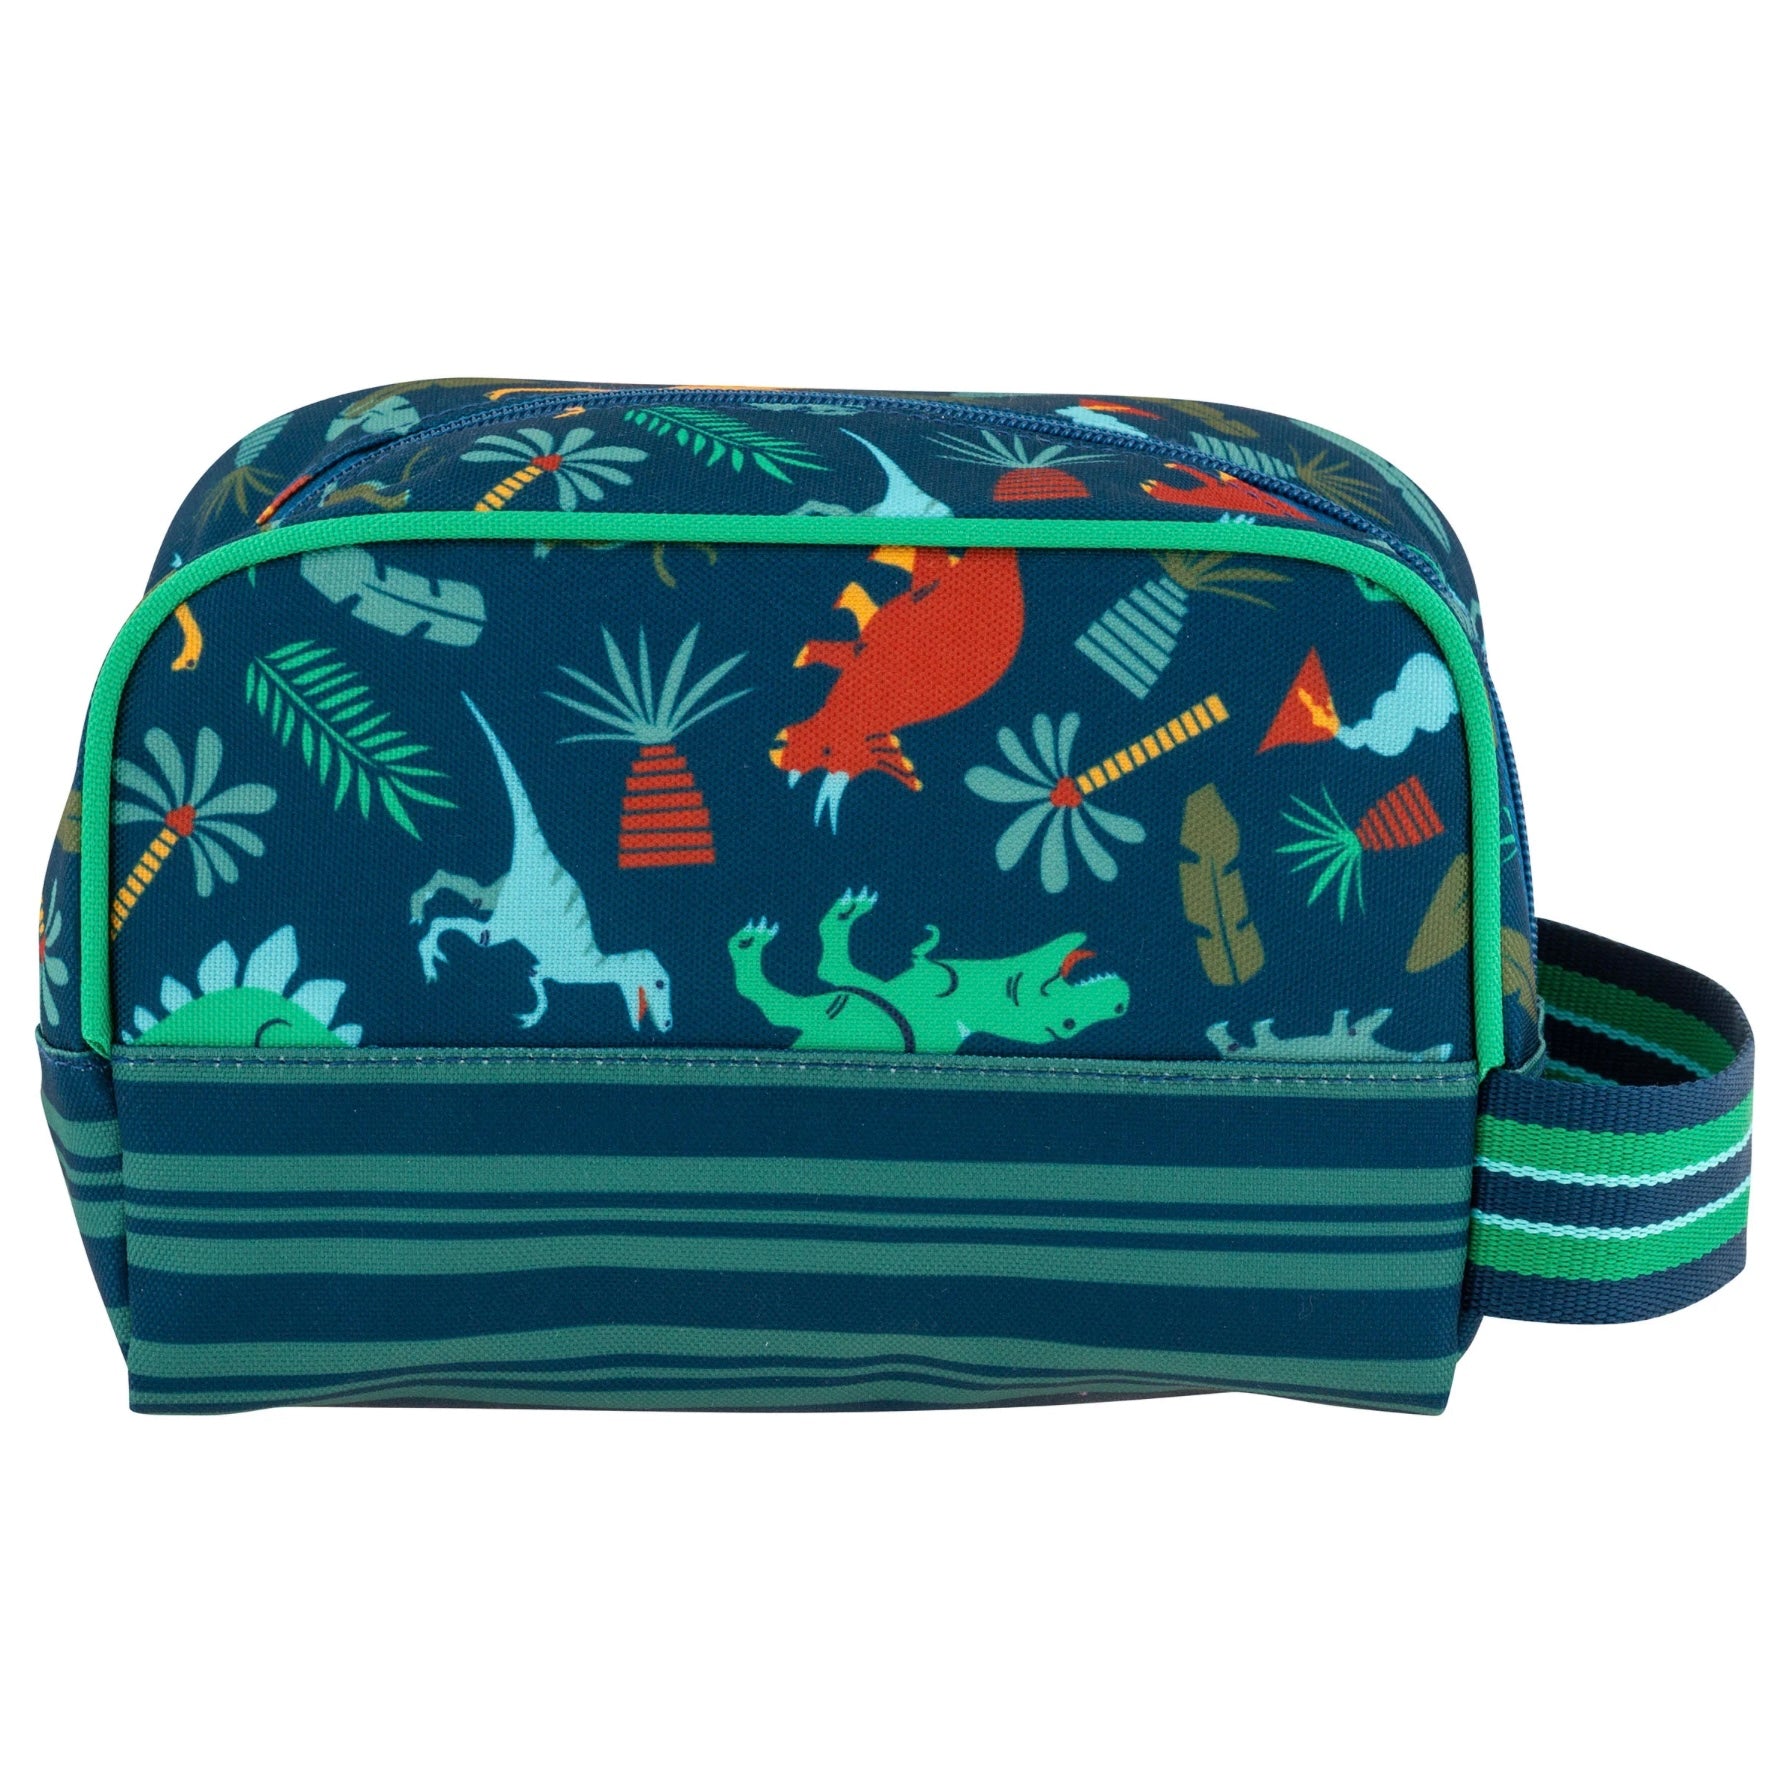 Personalized  Toiletry Bag - Dino